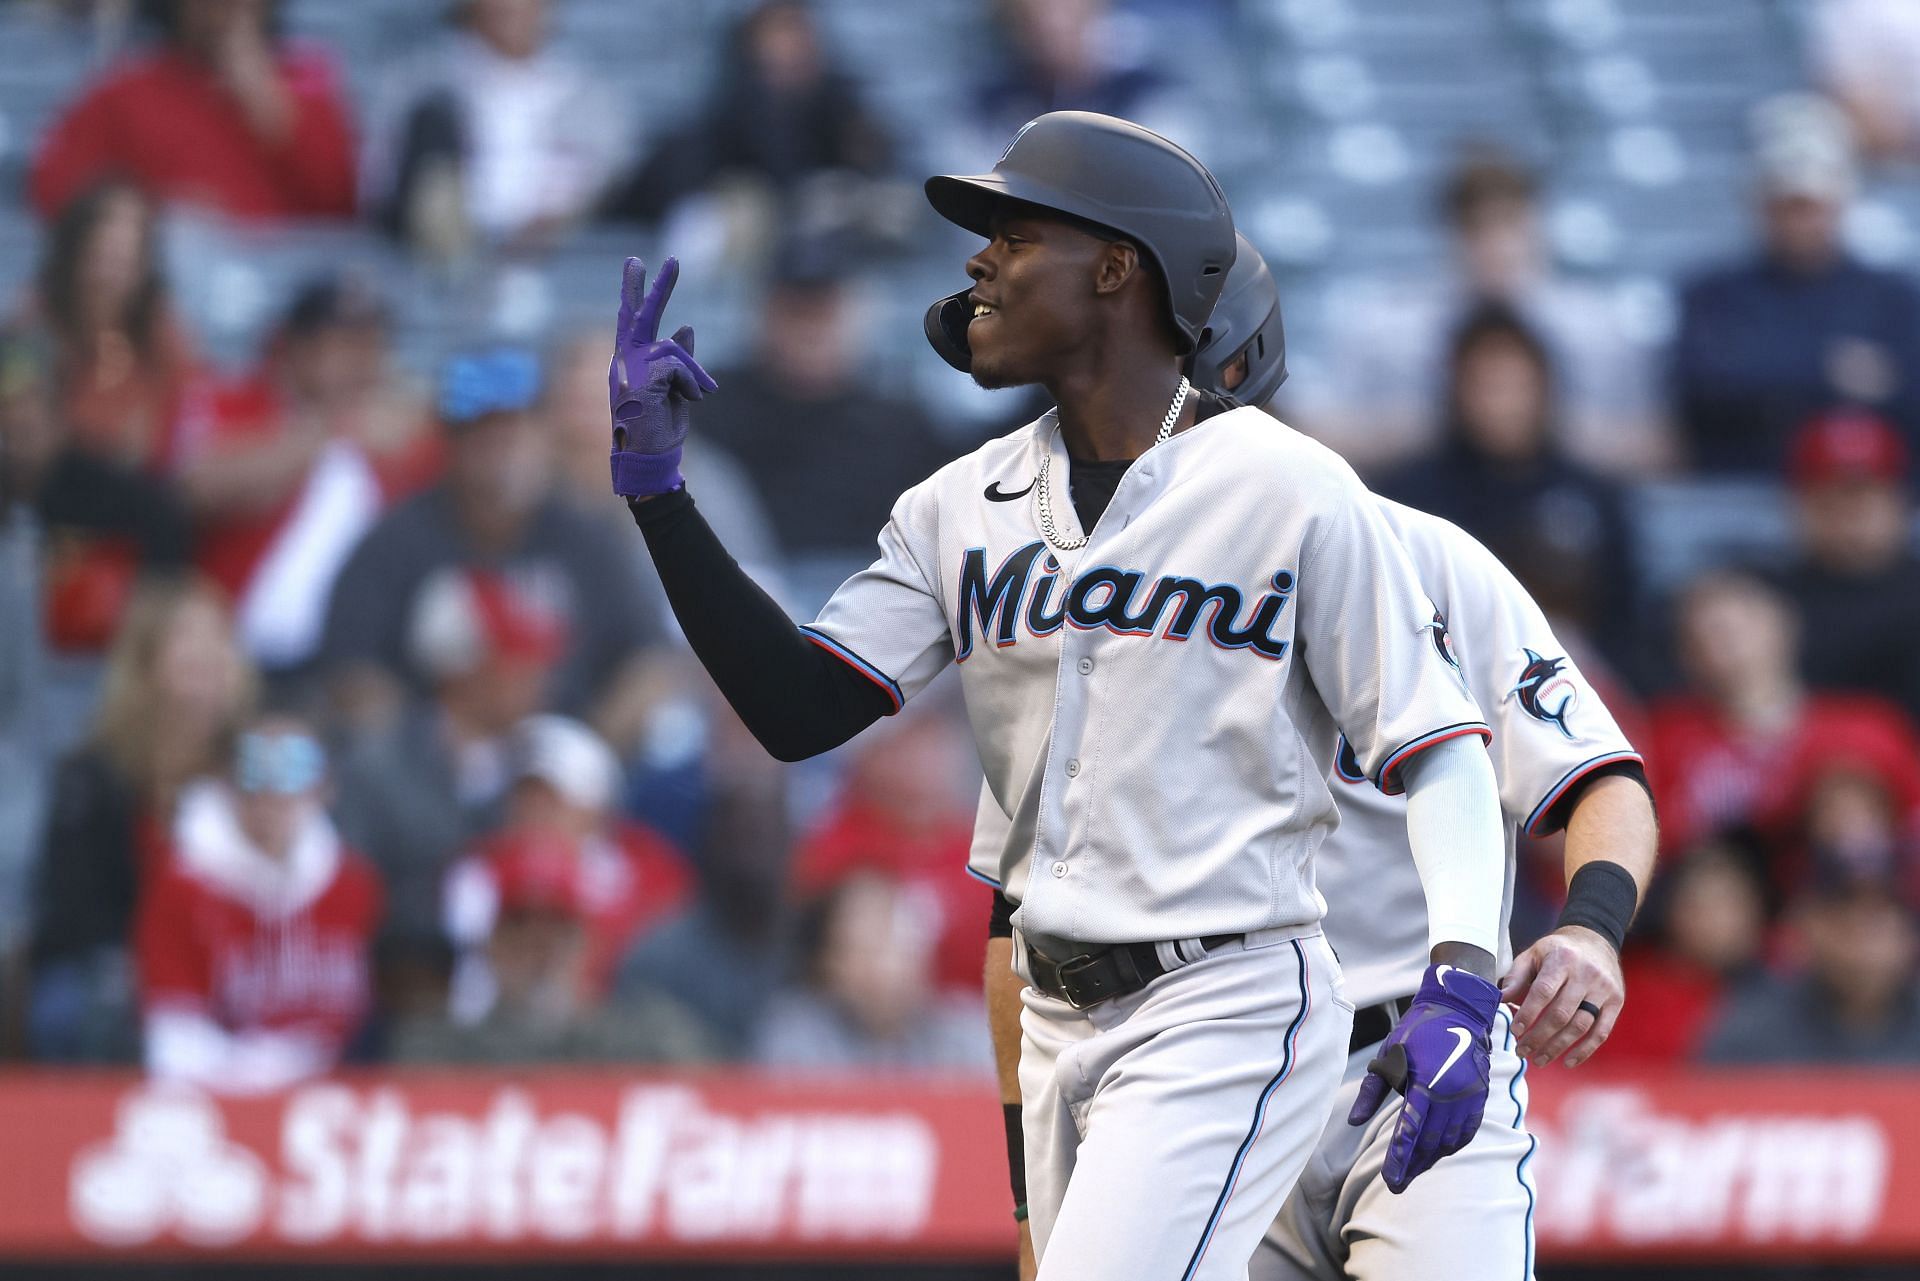 Marlins second baseman Jazz Chisholm Jr. selected to start in All-Star Game  – Sun Sentinel